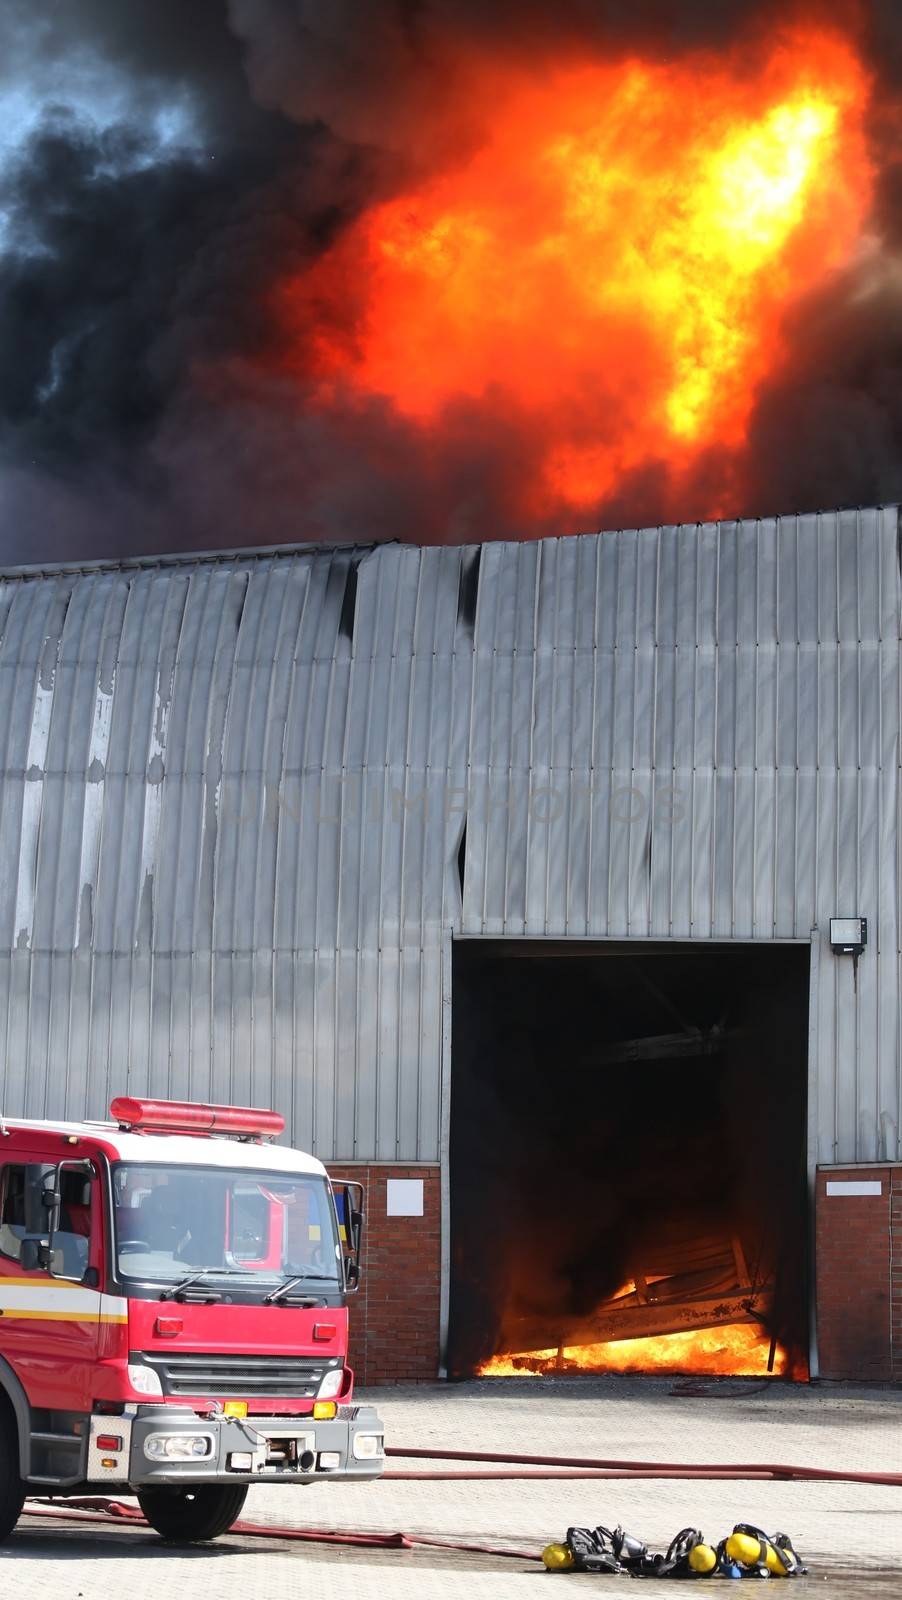 Warehouse building burning with intense flames and firemen attending